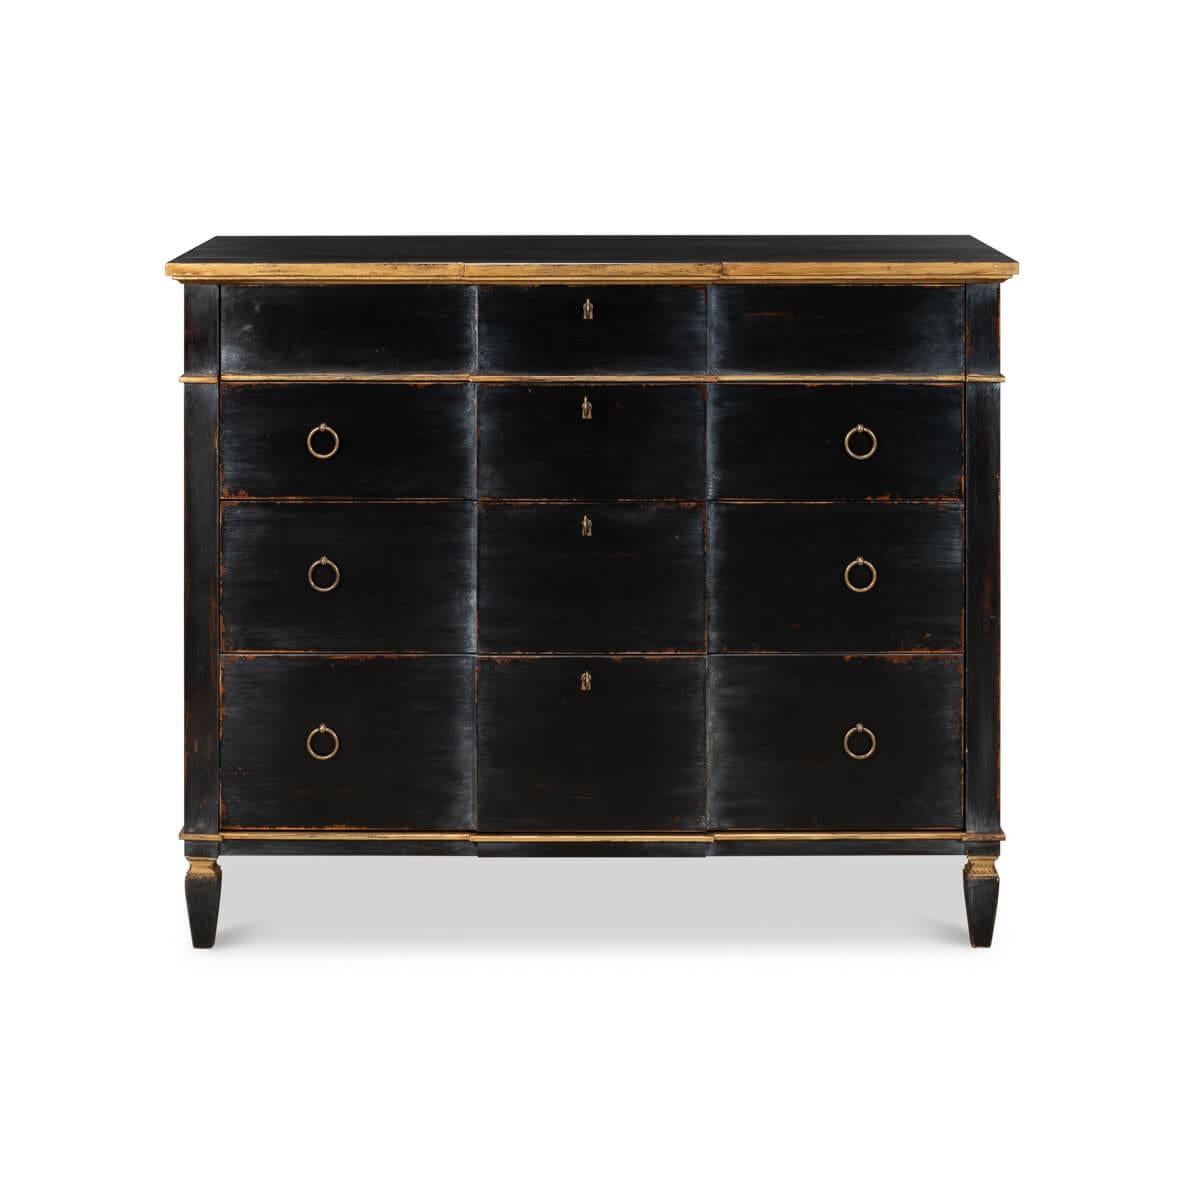 A timeless marvel. Crafted from wood with a Powder Black and Gold Finish, this 48